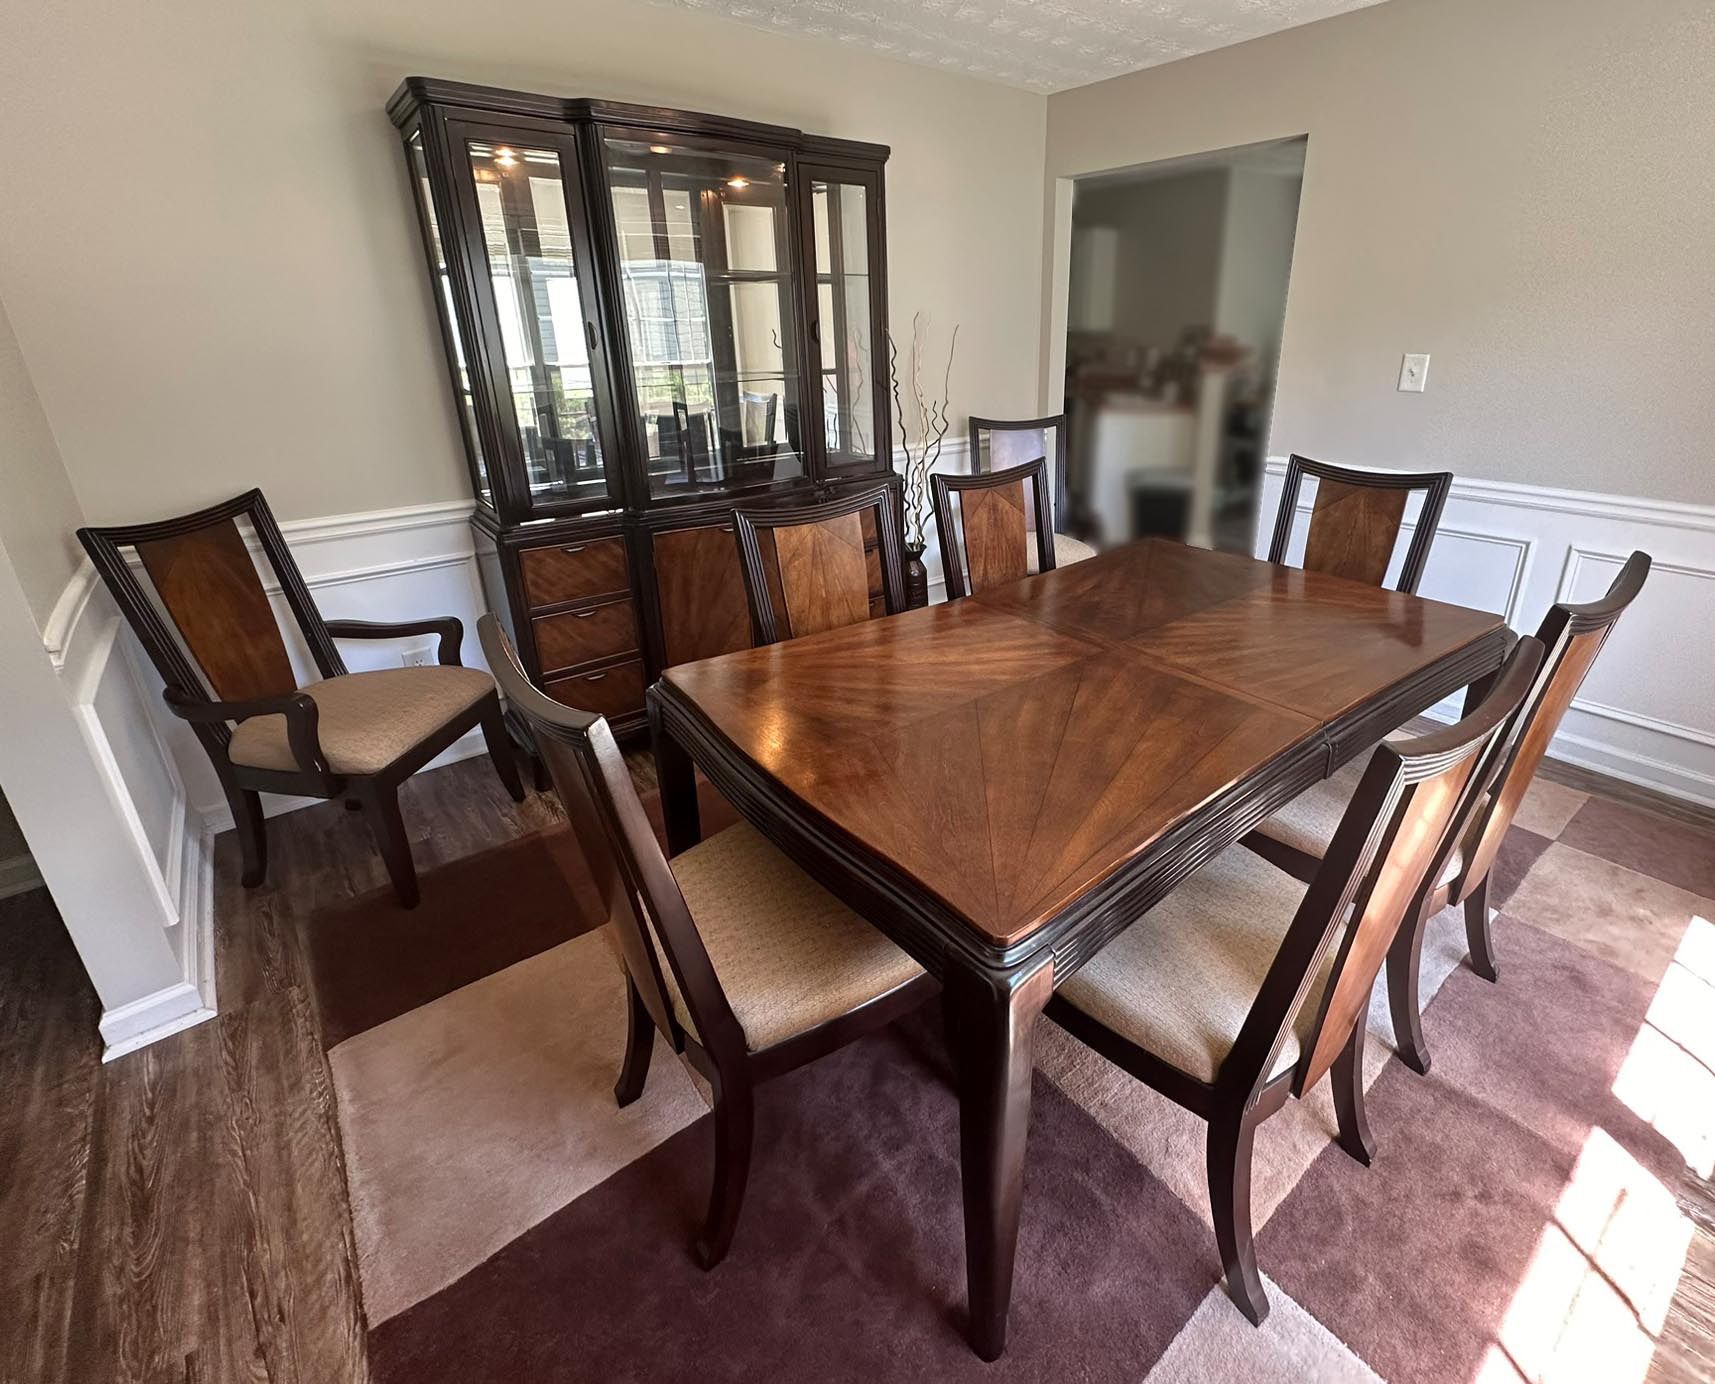 Dining Room Table With 8 Chairs, Cabinet And Rug